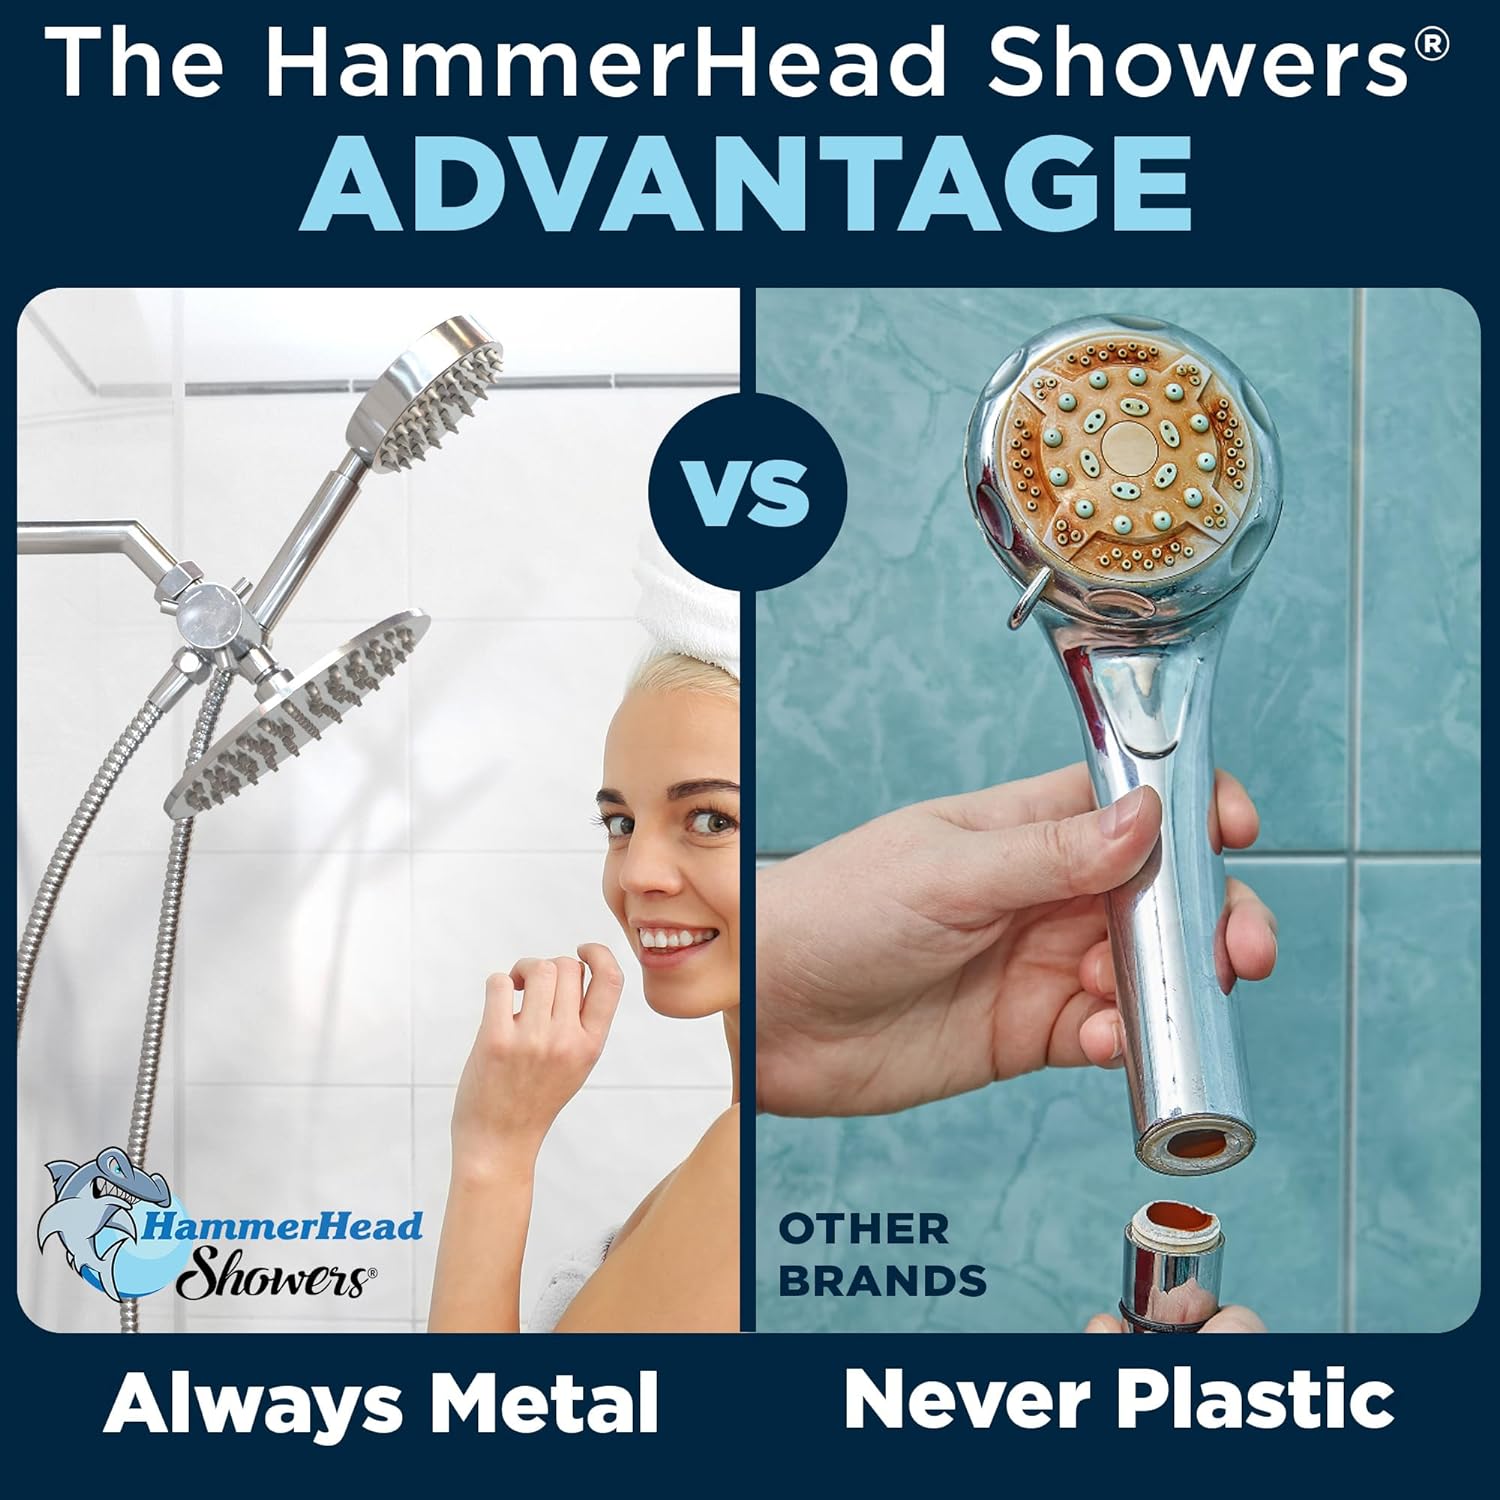 ALL METAL Dual Shower Head Combo – CHROME - 8 Inch Rainfall High Flow Shower Head  Handheld Shower Head High Pressure with Hose 6ft - Hotel-like Luxury Double Shower Heads with Rain Shower Sprayer